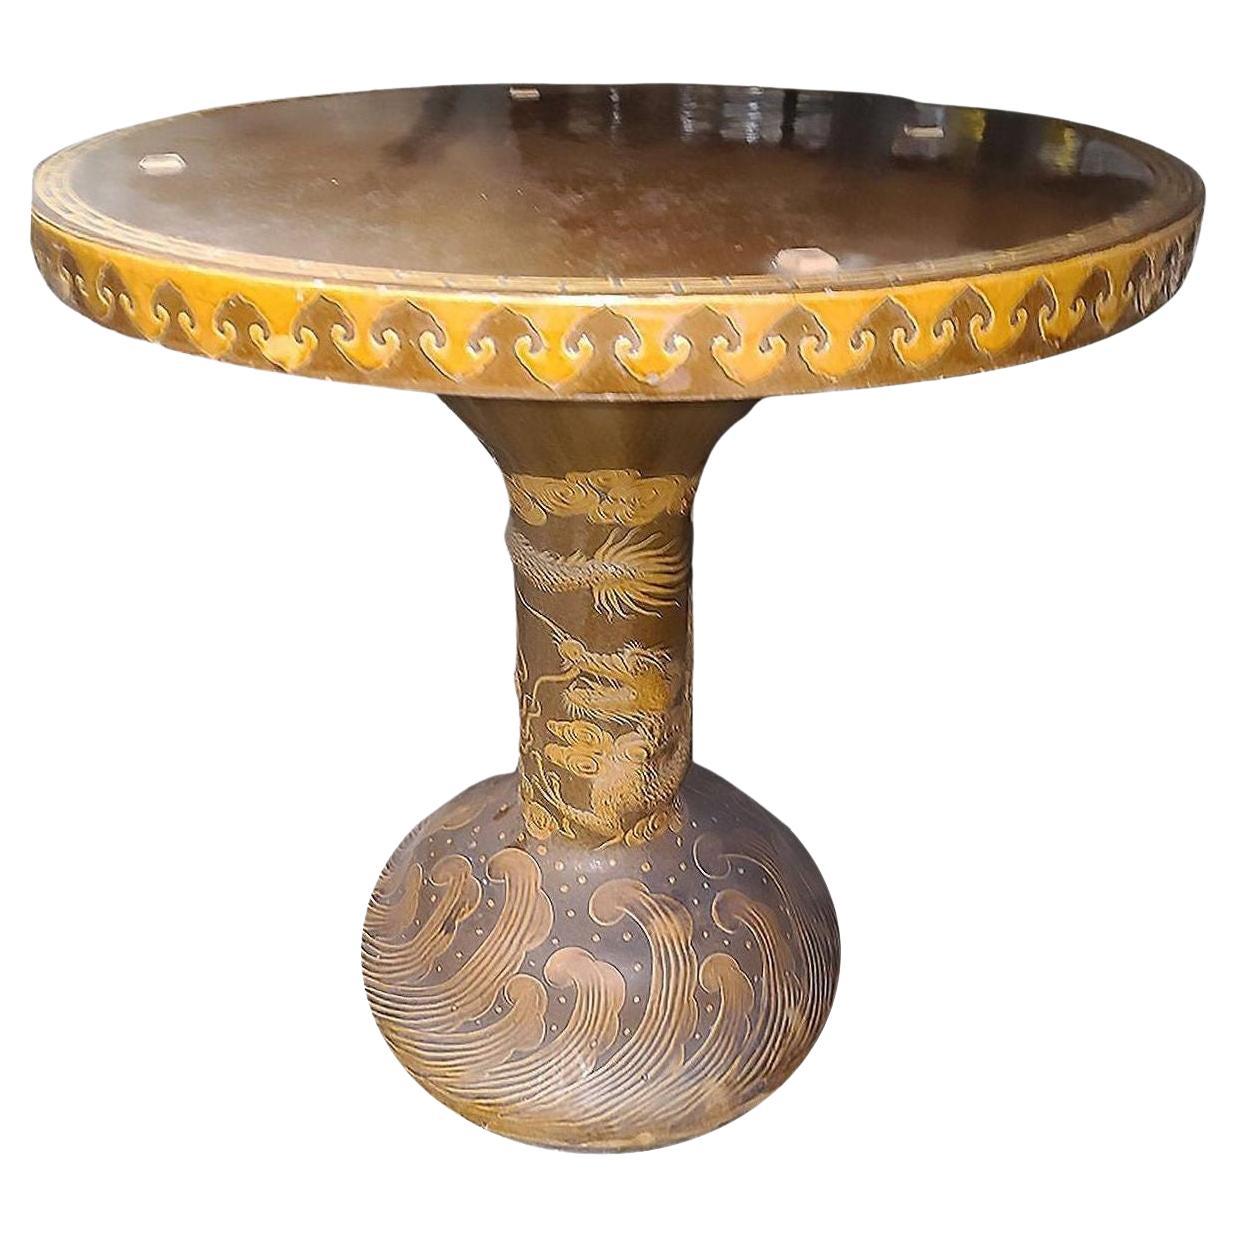 Chinese Dragon Ceramic Glazed Pedestal Table For Sale